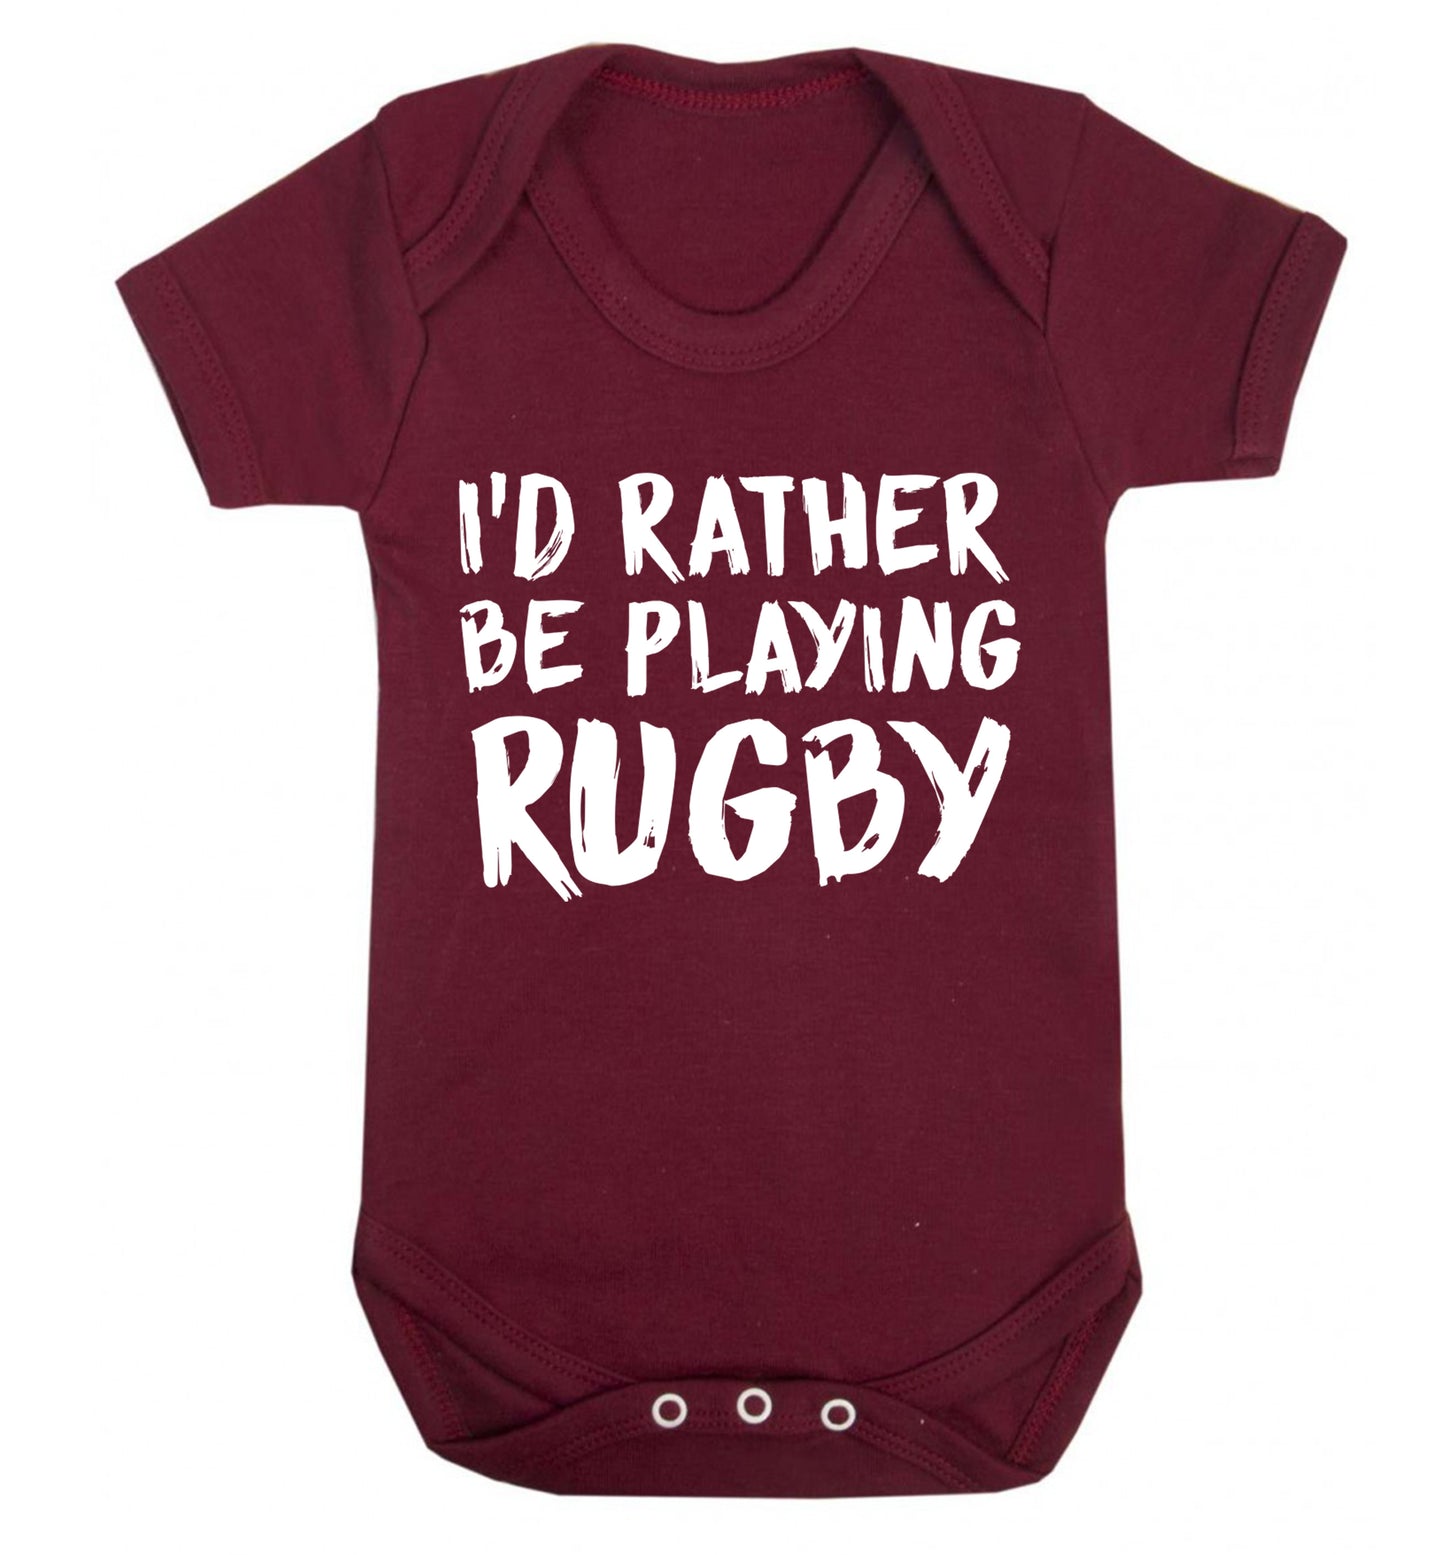 I'd rather be playing rugby Baby Vest maroon 18-24 months